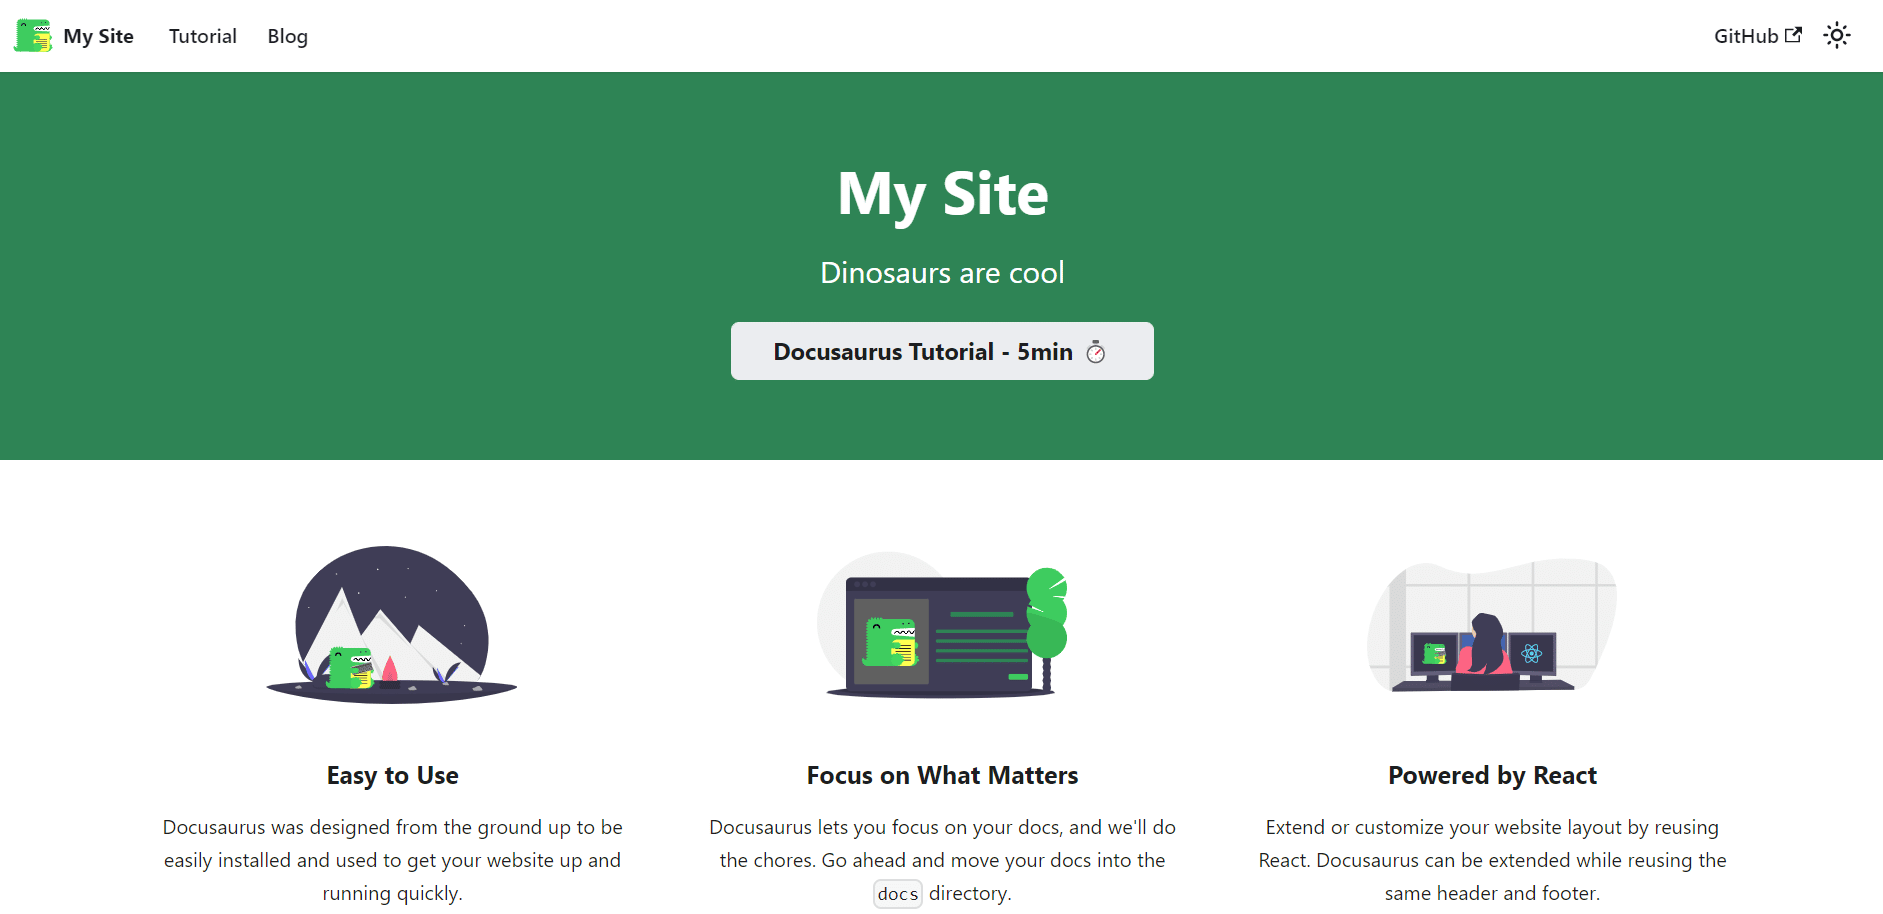 Docusaurus default My Site page after successful installation.